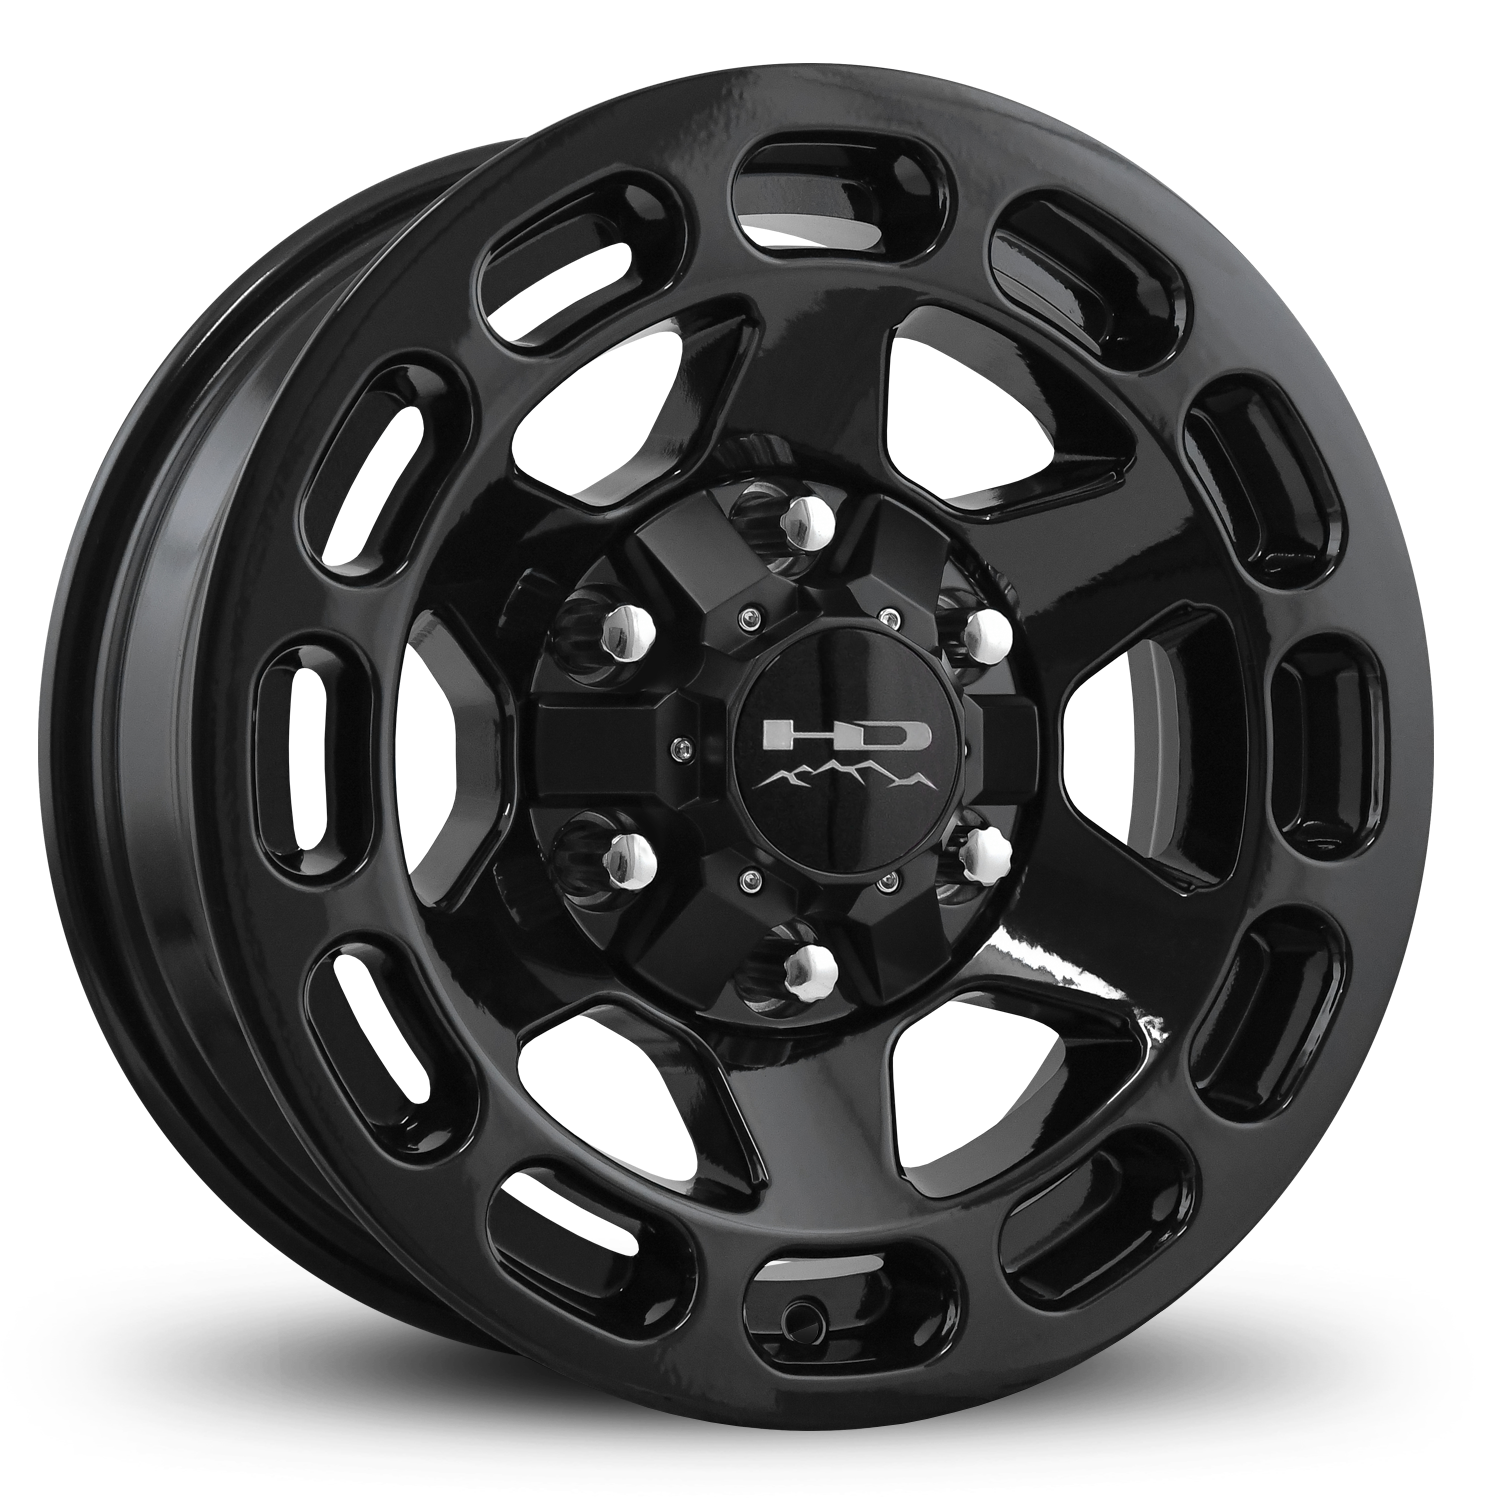 HD Off-Road Patriot Custom Trailer Wheel & Tire packages in 15x6.0 in 6 lug All Gloss Black for Unility, Boat, Car, Construction, Horse, & RV